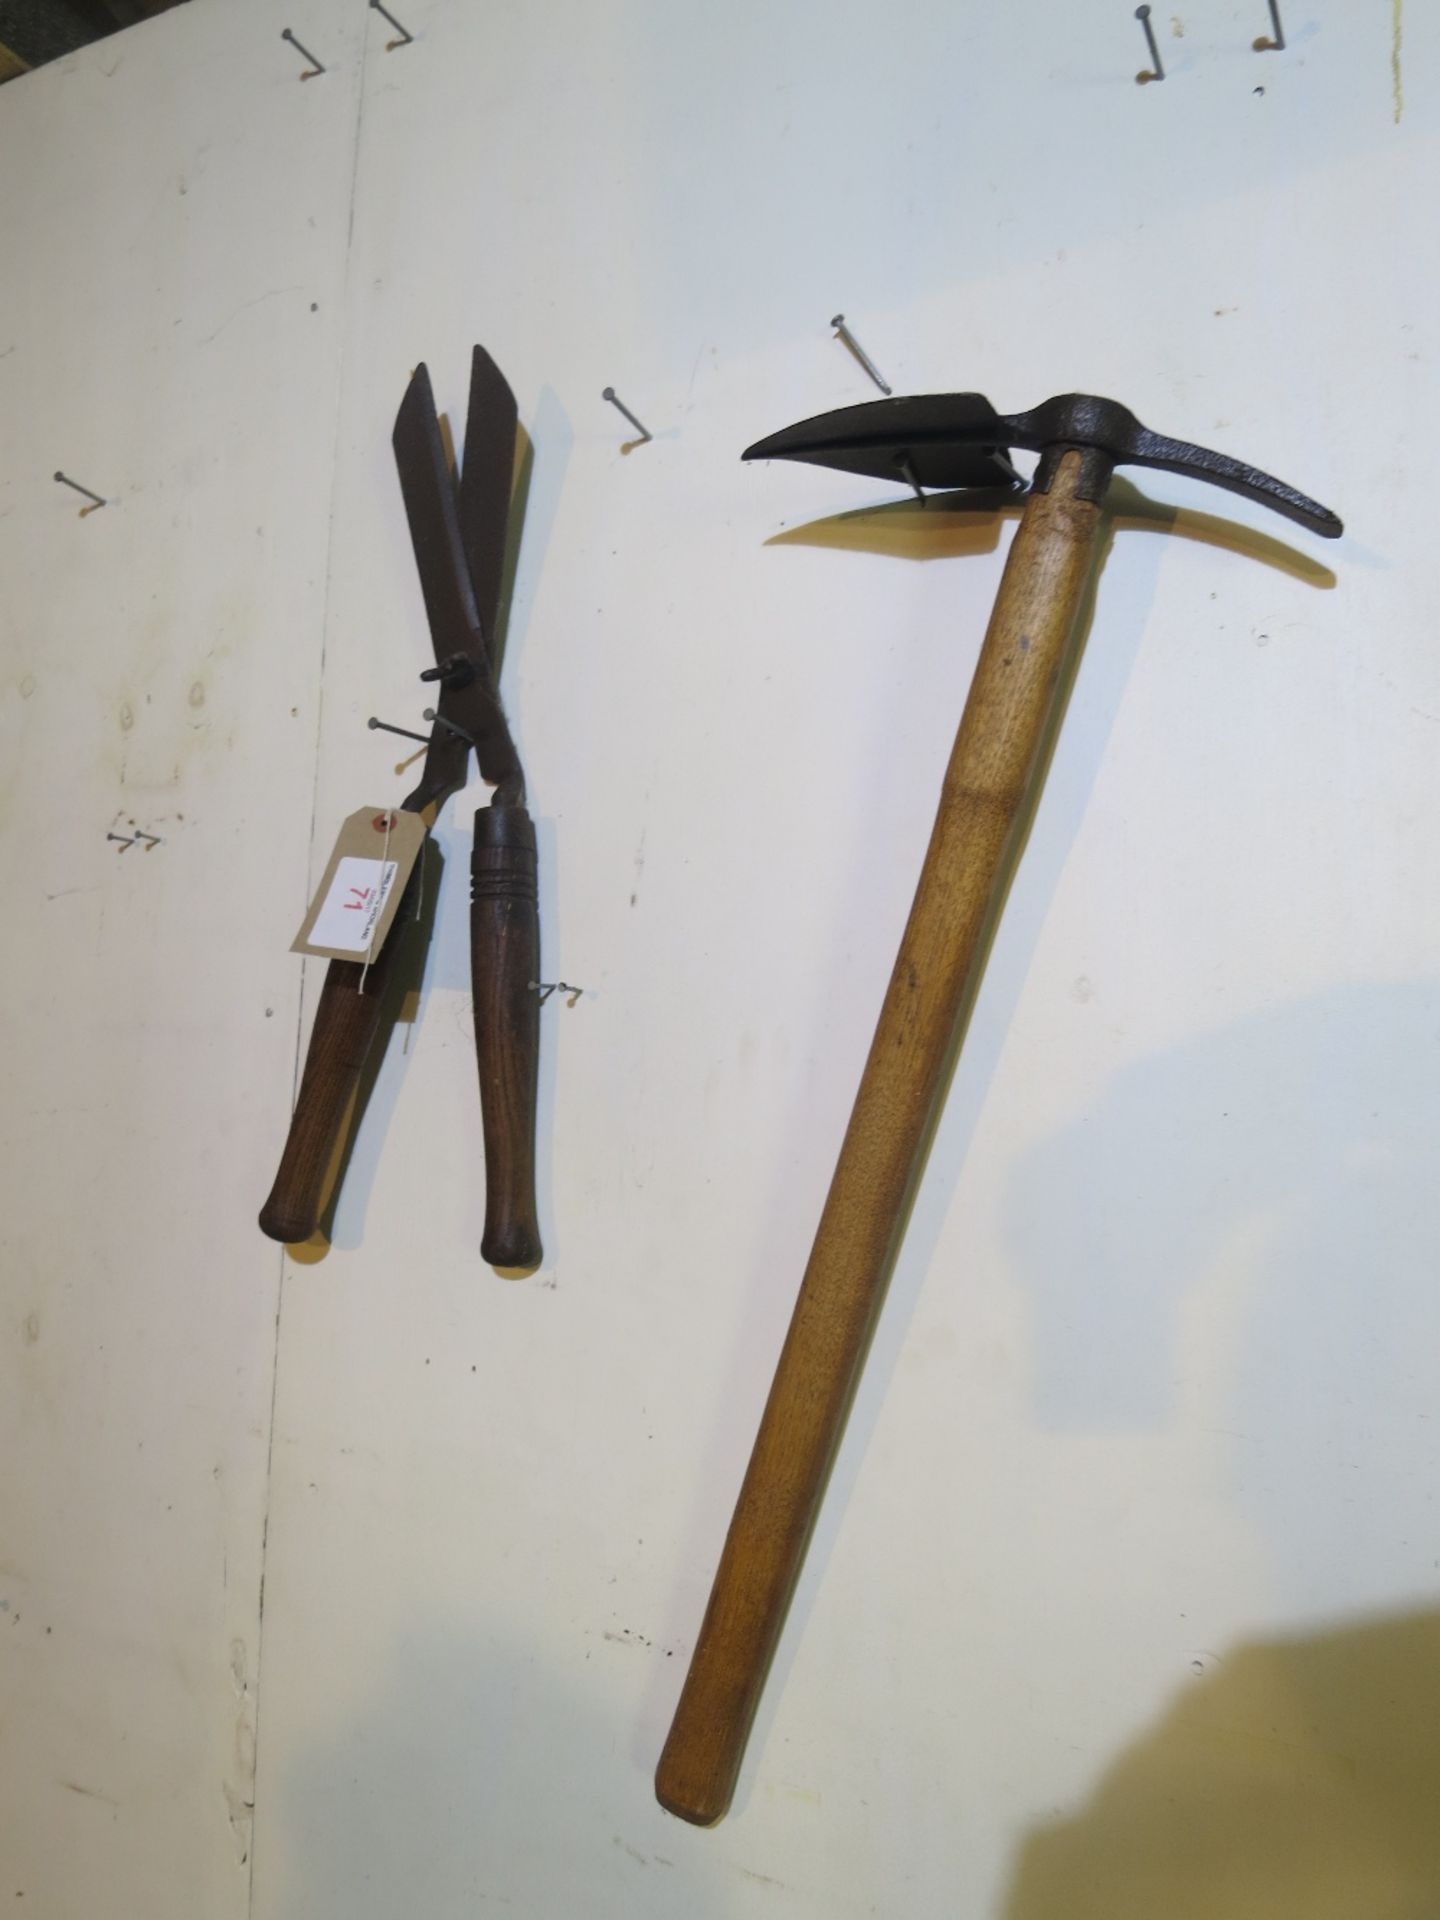 Set of hand shears and a double-headed pick/hoe